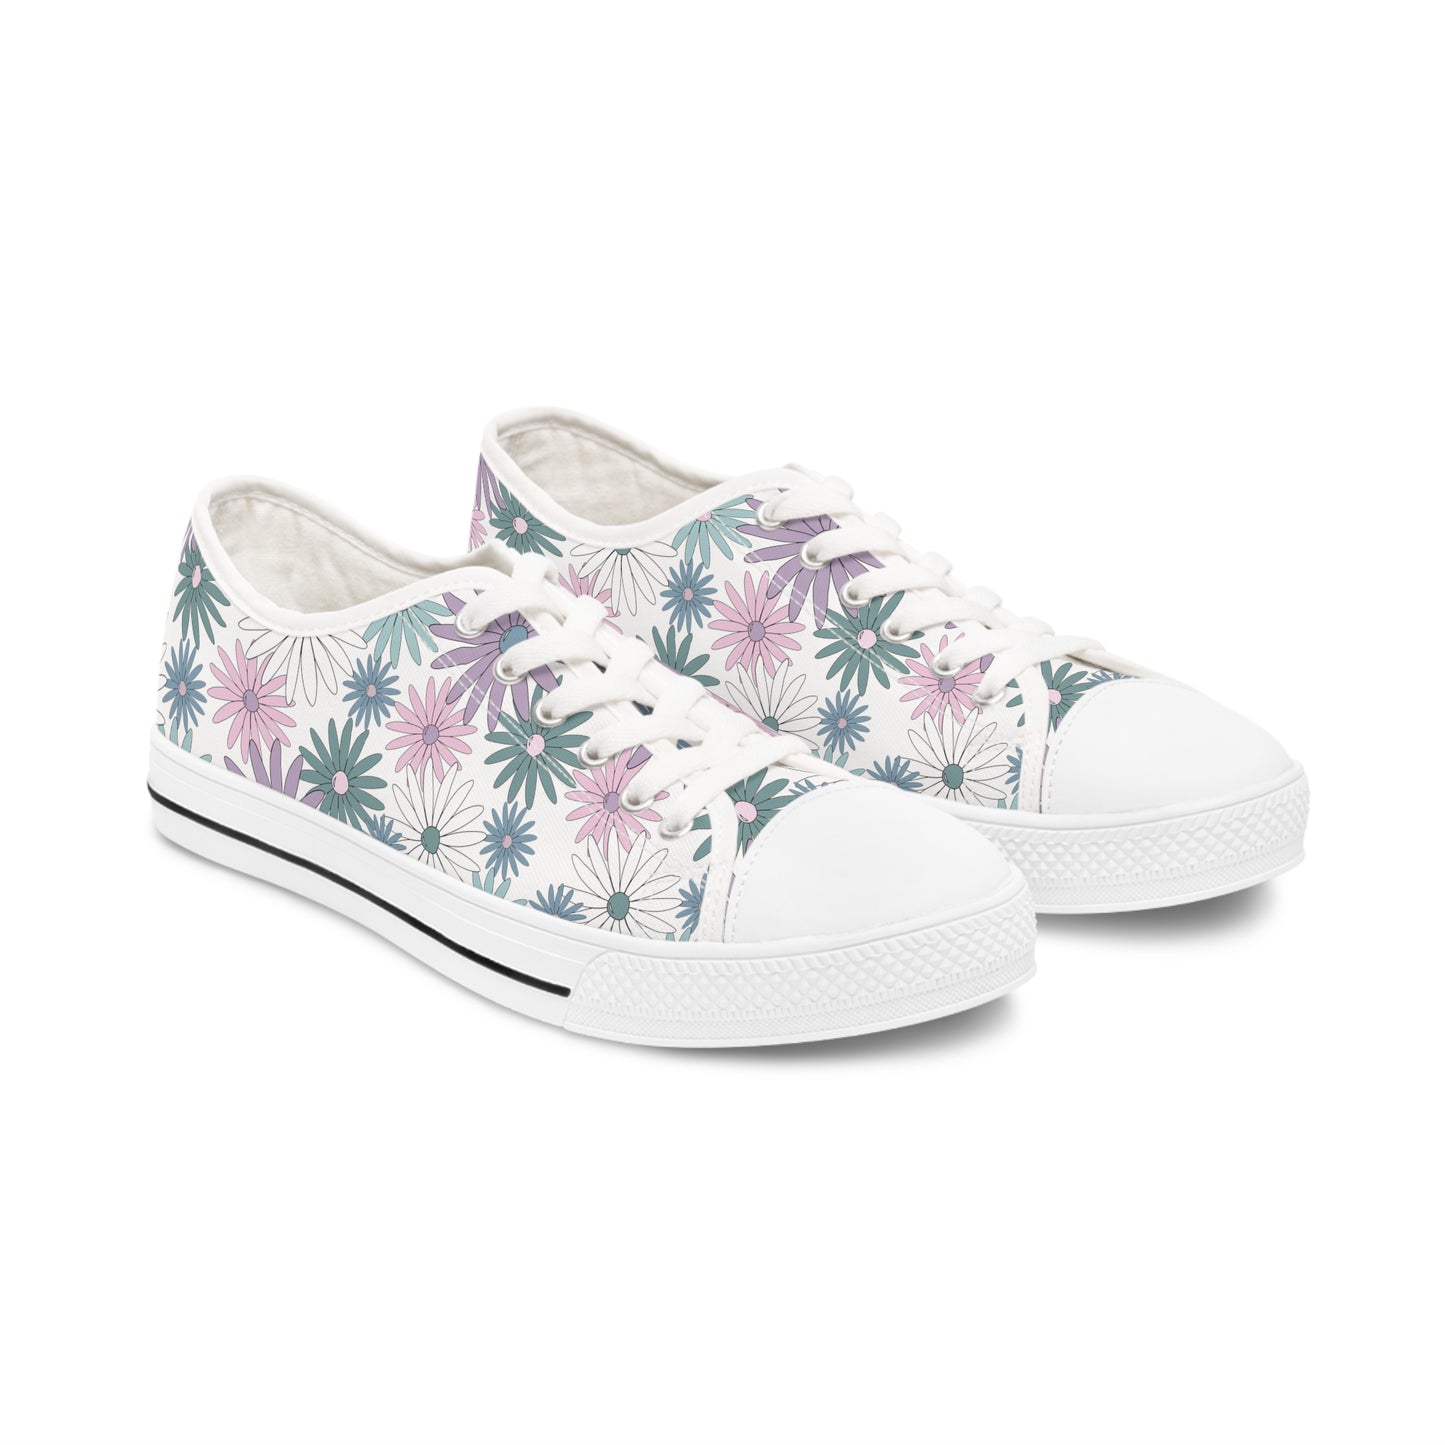 Pastel Daisy's Low Top Sneakers